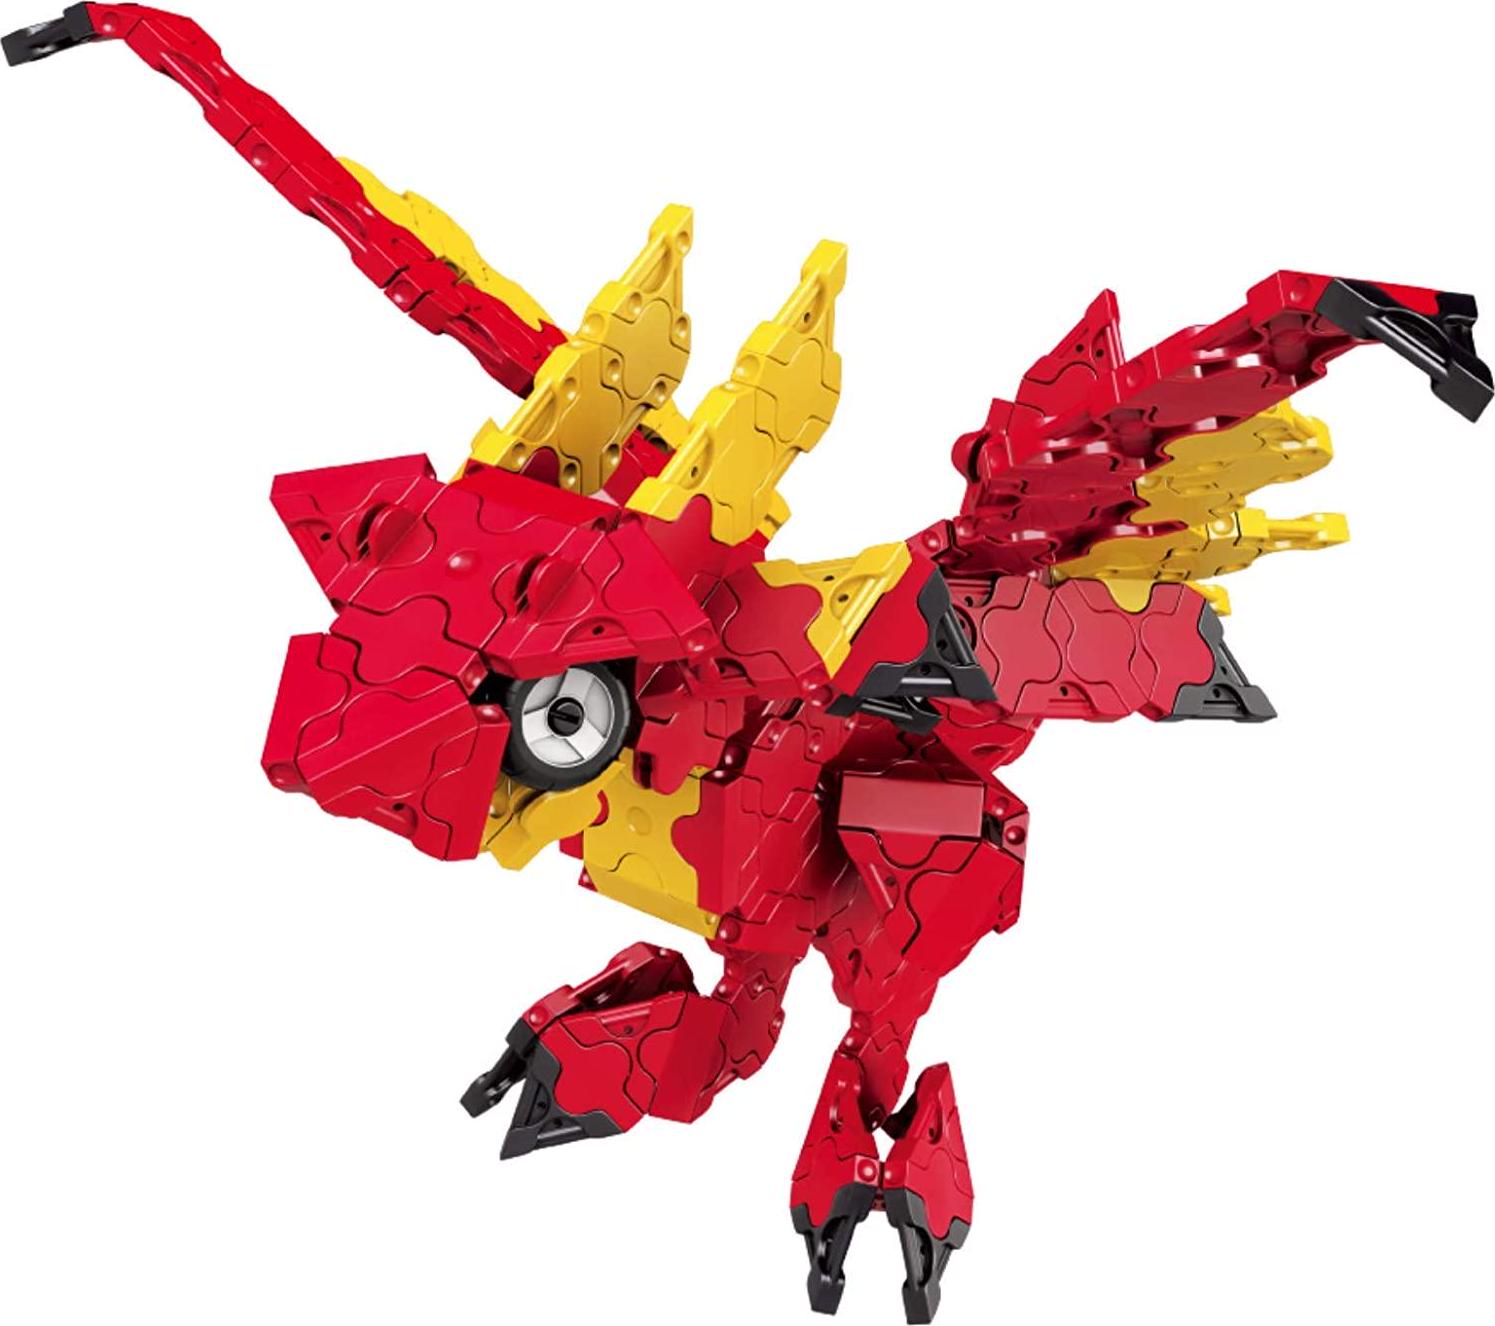 LaQ, LaQ Mystical Beast WYVERN - 5 Models, 260 Pieces | Construction Stem Set | Educational Engineering Toy for Ages 5, 6, 7, 8, 9, 10 Year Old Boys and Girls | Best Kids Fun Building kit